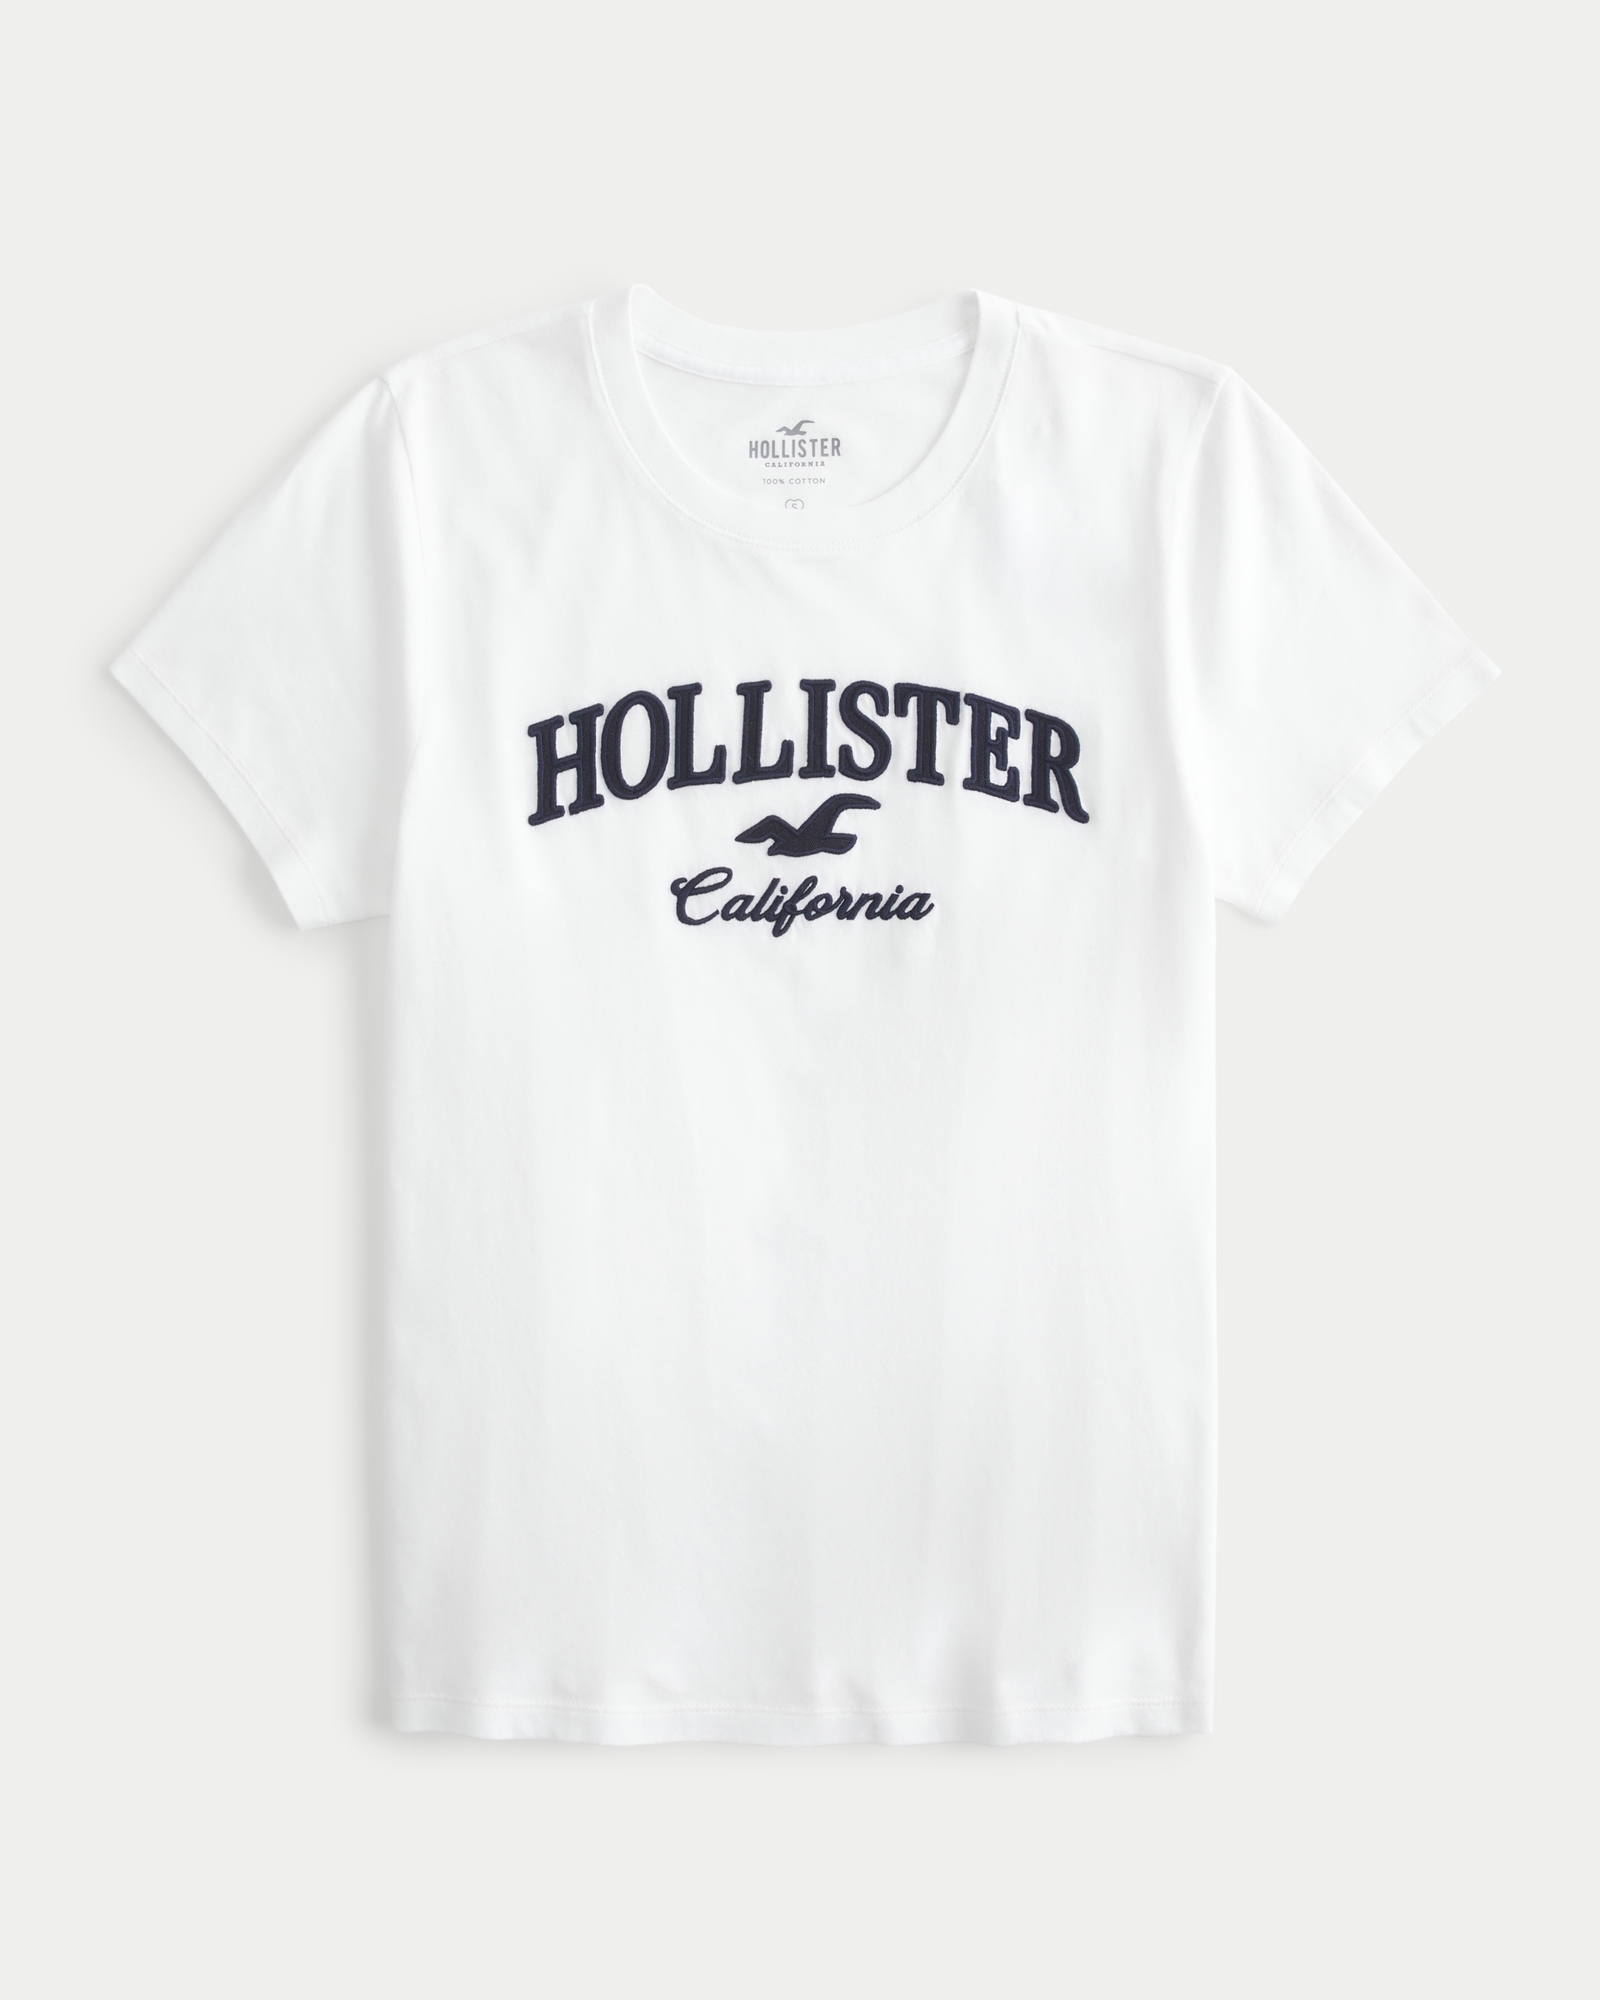 Hollister Co. Denim Tops & T-Shirts for Girls Sizes (4+)